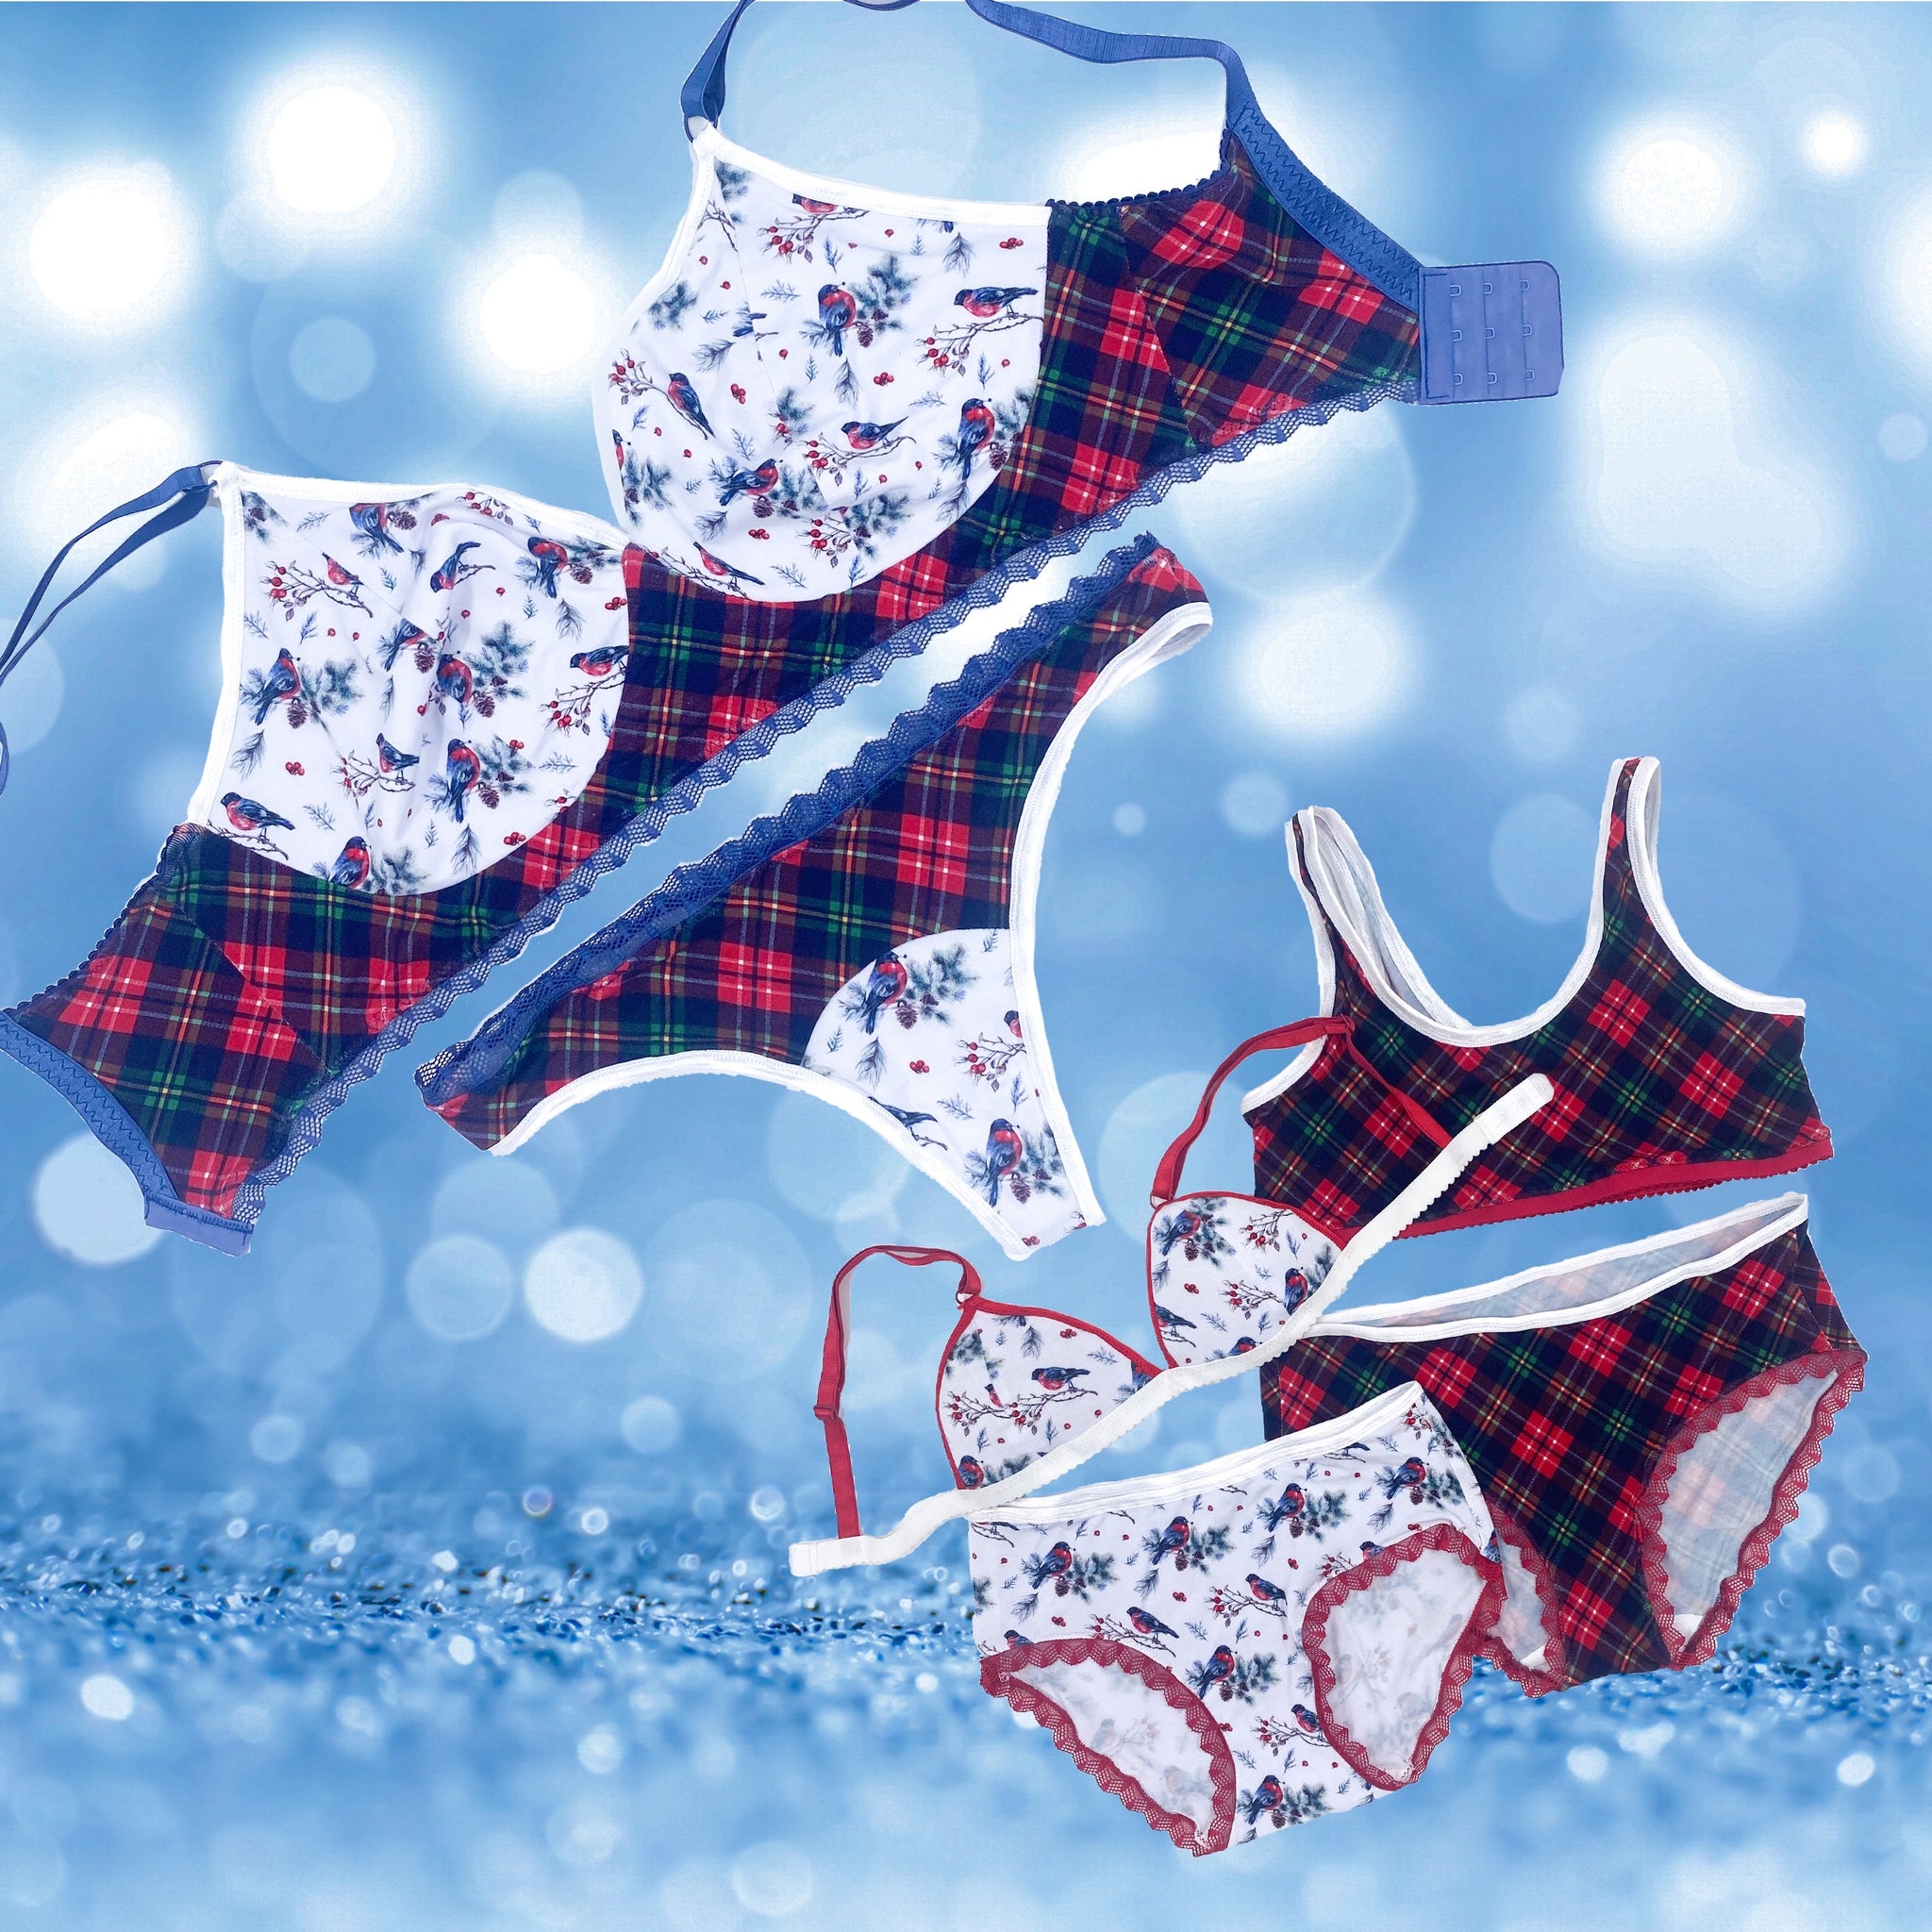 Sew your perfect panties with dozens of Radcliffe Undies kits!